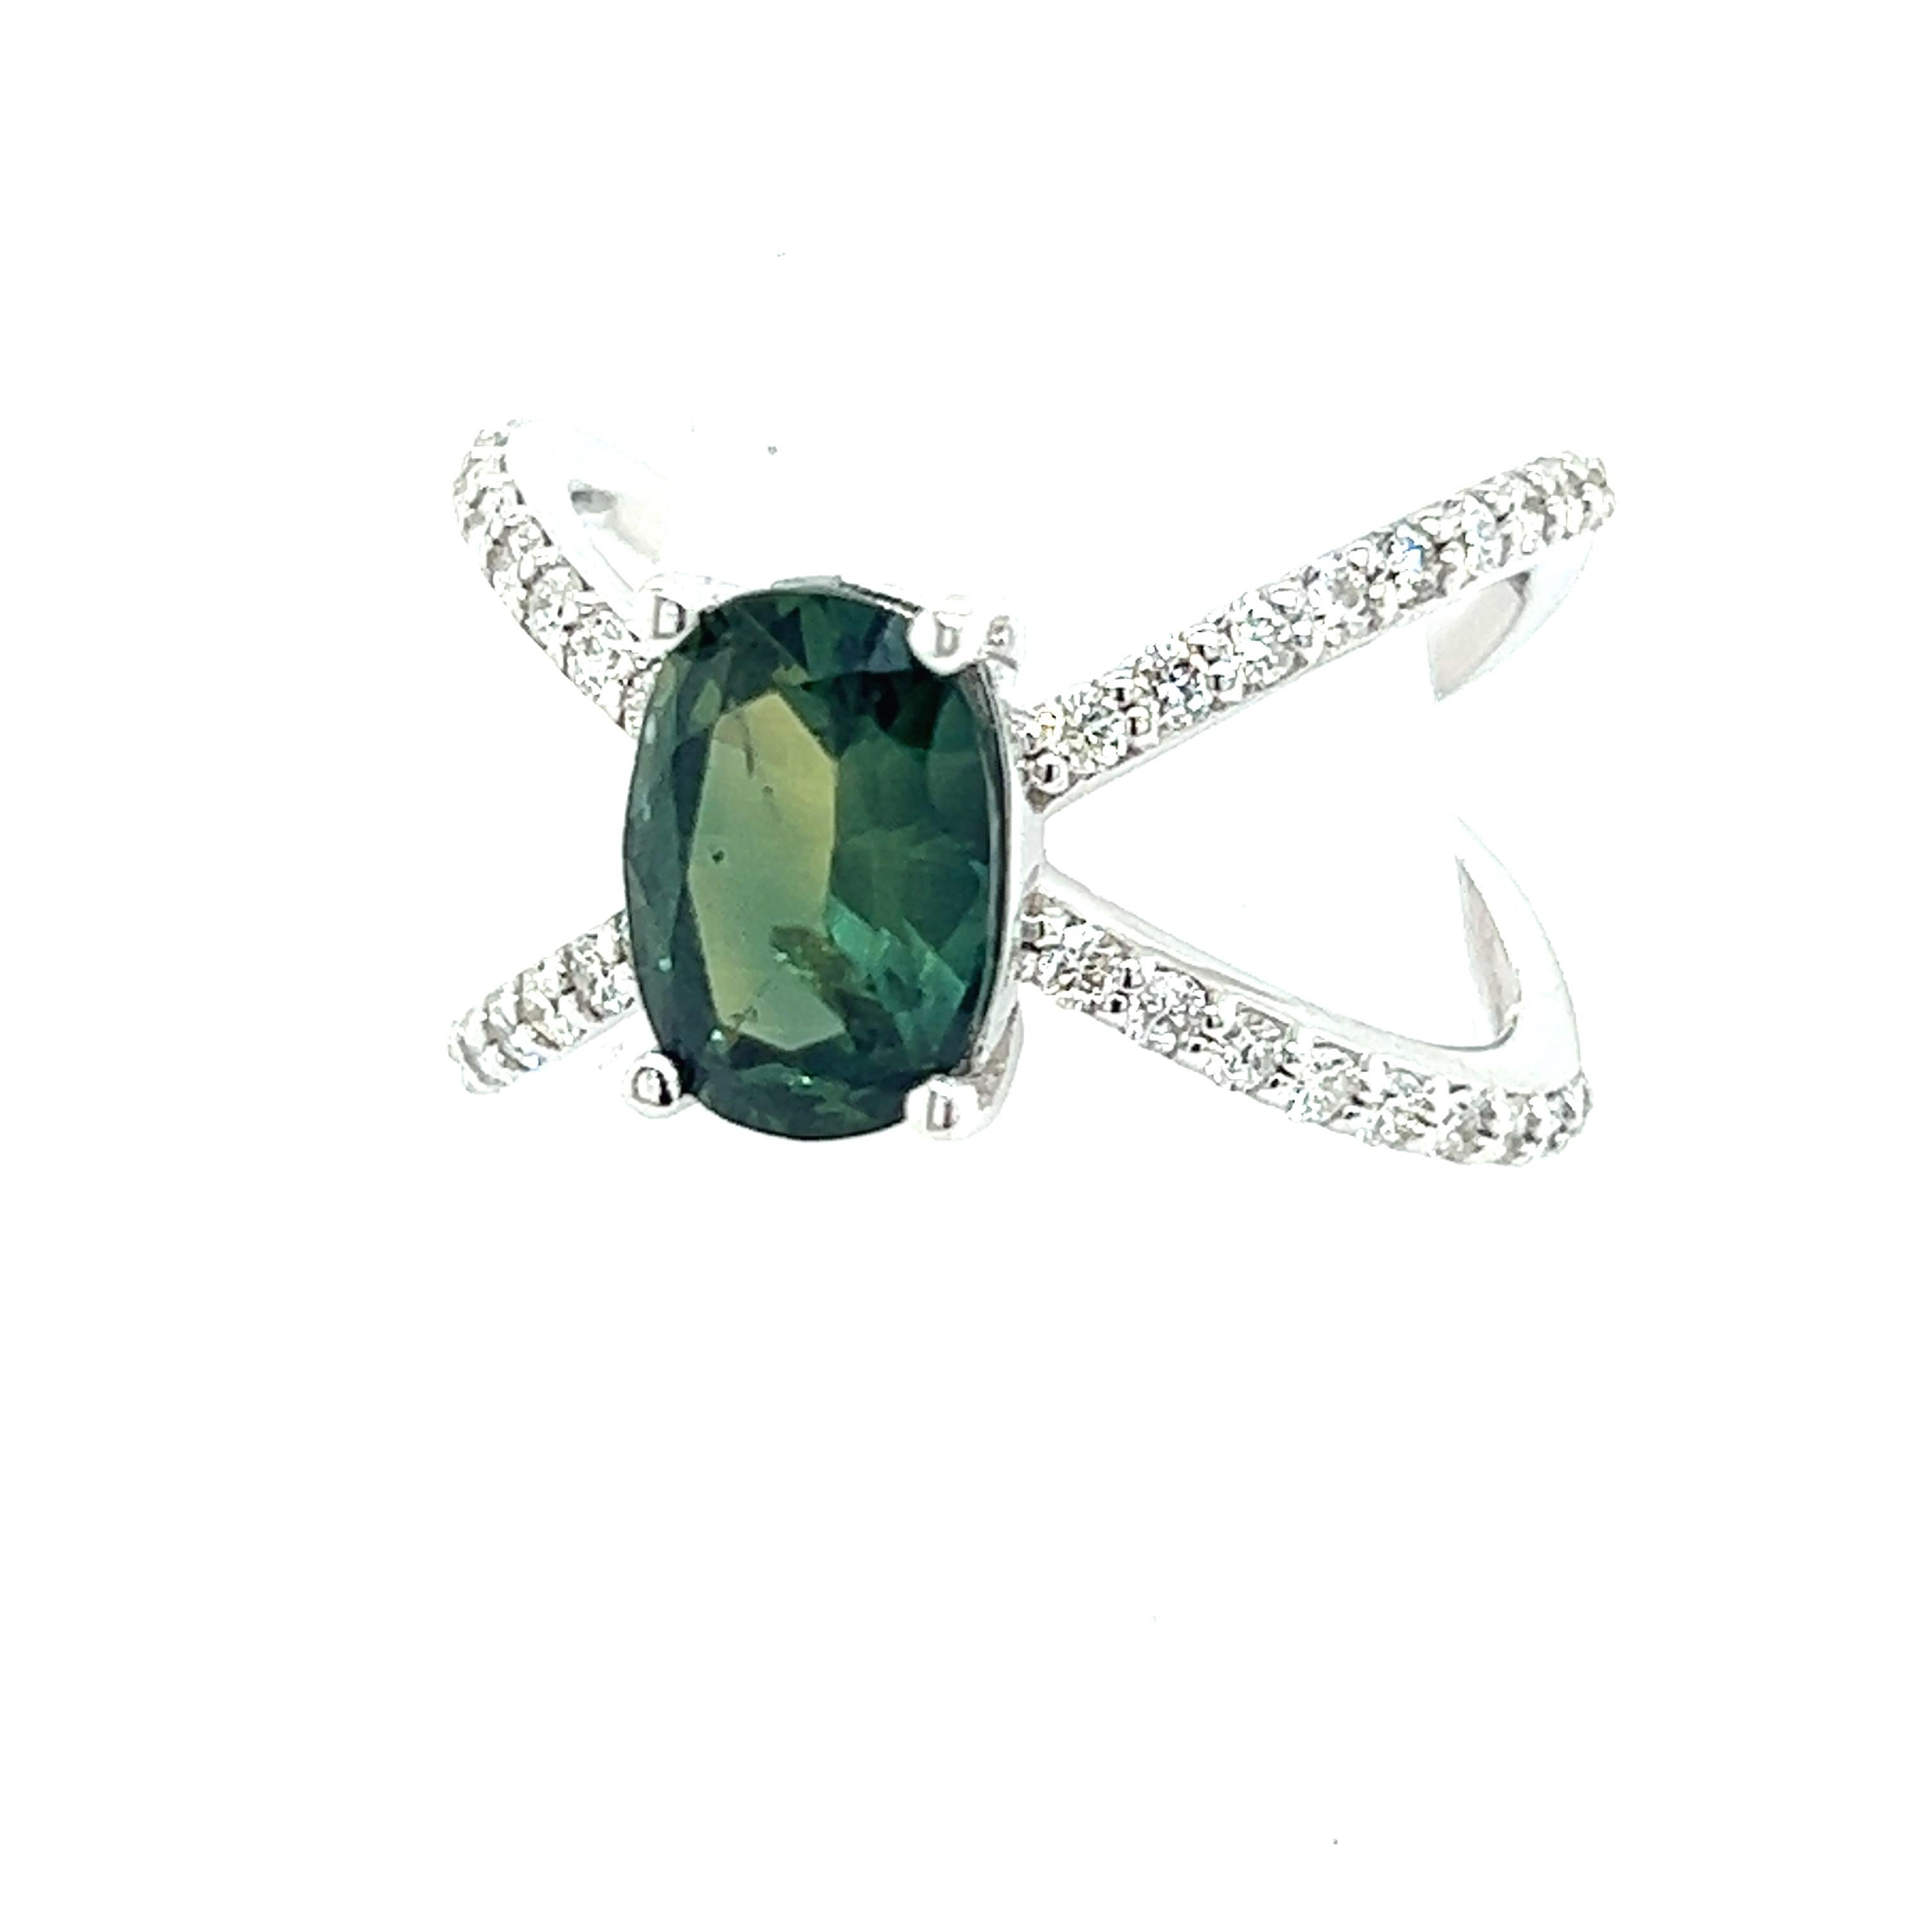 Natural Tourmaline Diamond Ring 14k W Gold 1.78 TCW Certificate For Sale 5